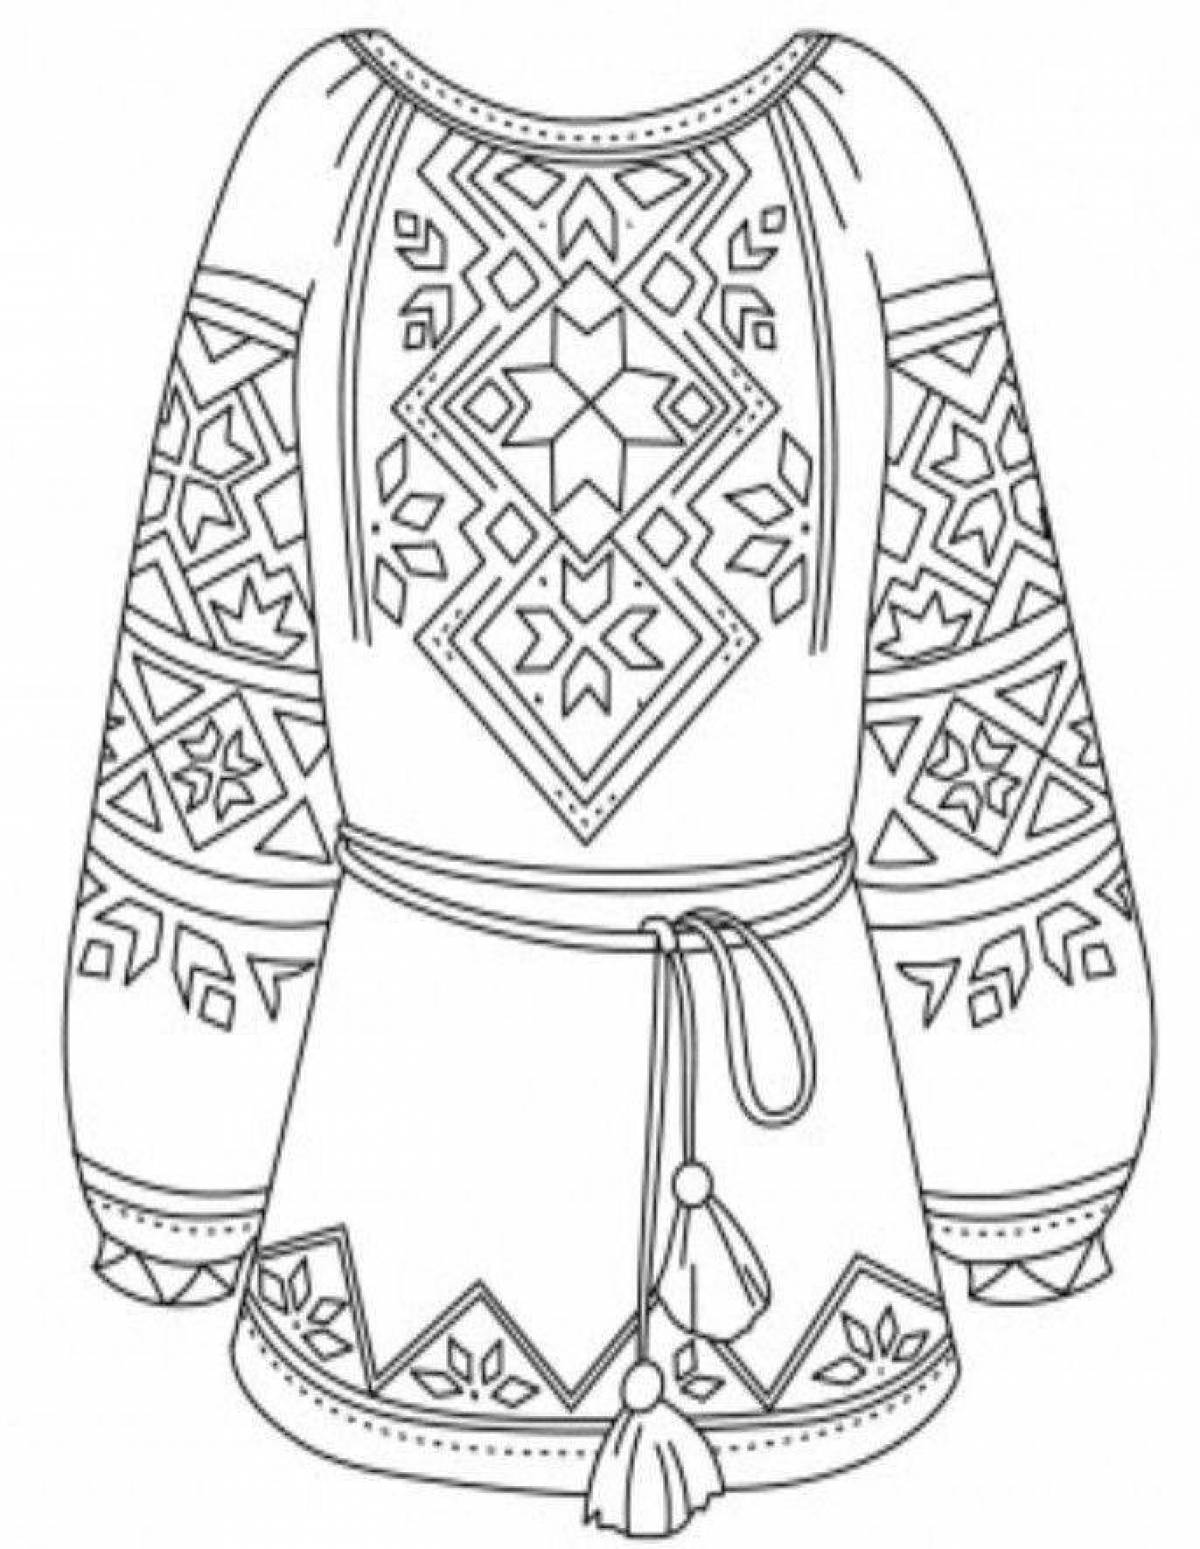 Coloring page festive belarusian costume